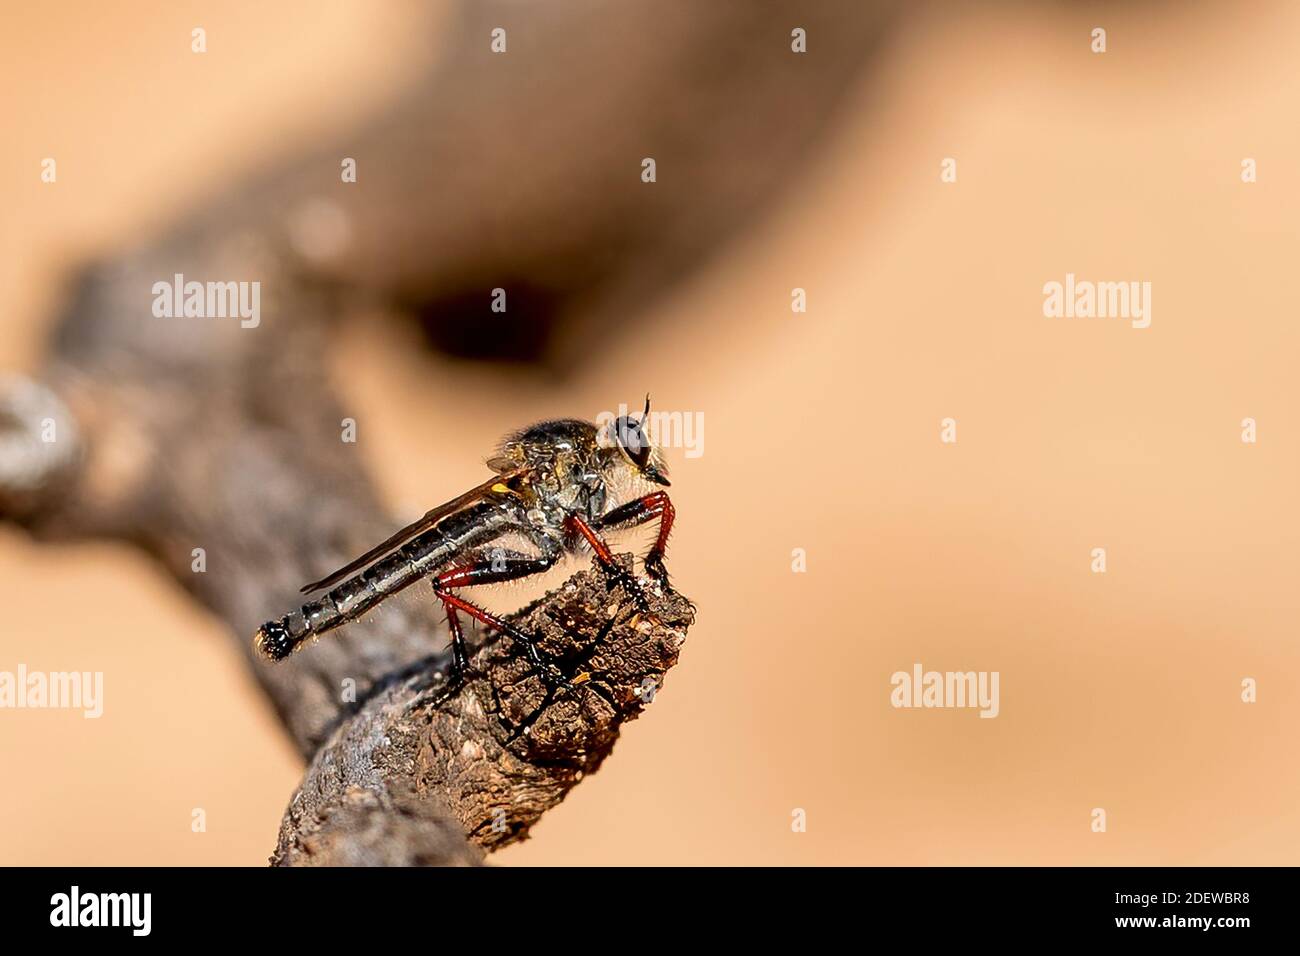 A Robber Fly of the scientific family Asilidae. Robber flies are large, bristly flies that catch their prey (usually other insects) mid-flight. Stock Photo